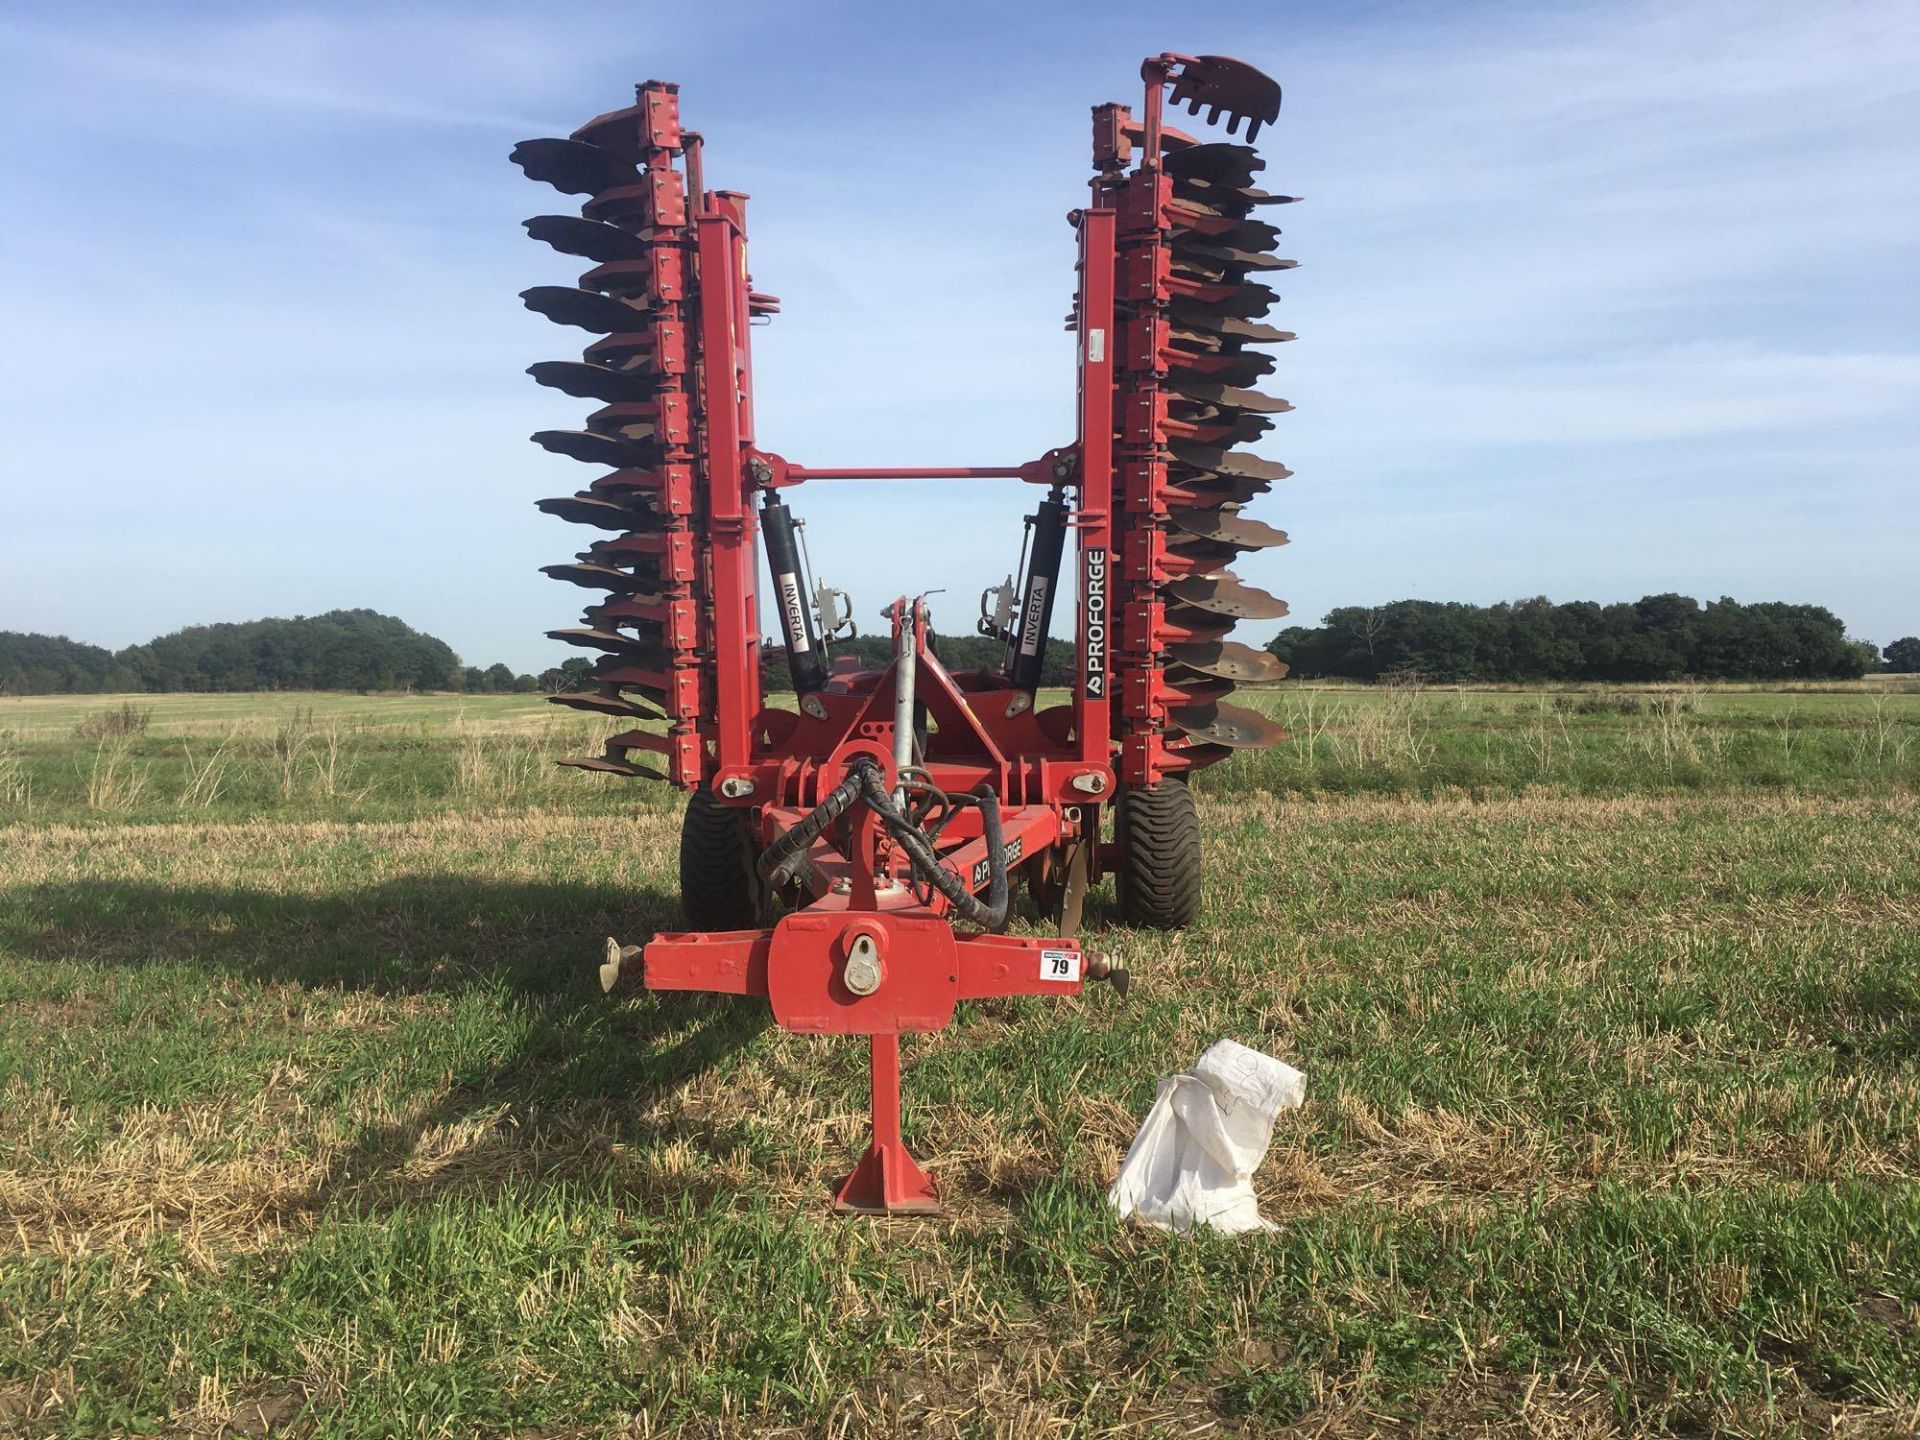 2018 Proforge Inverta 6m hydraulic folding cultivator with discs and rear packer roller.